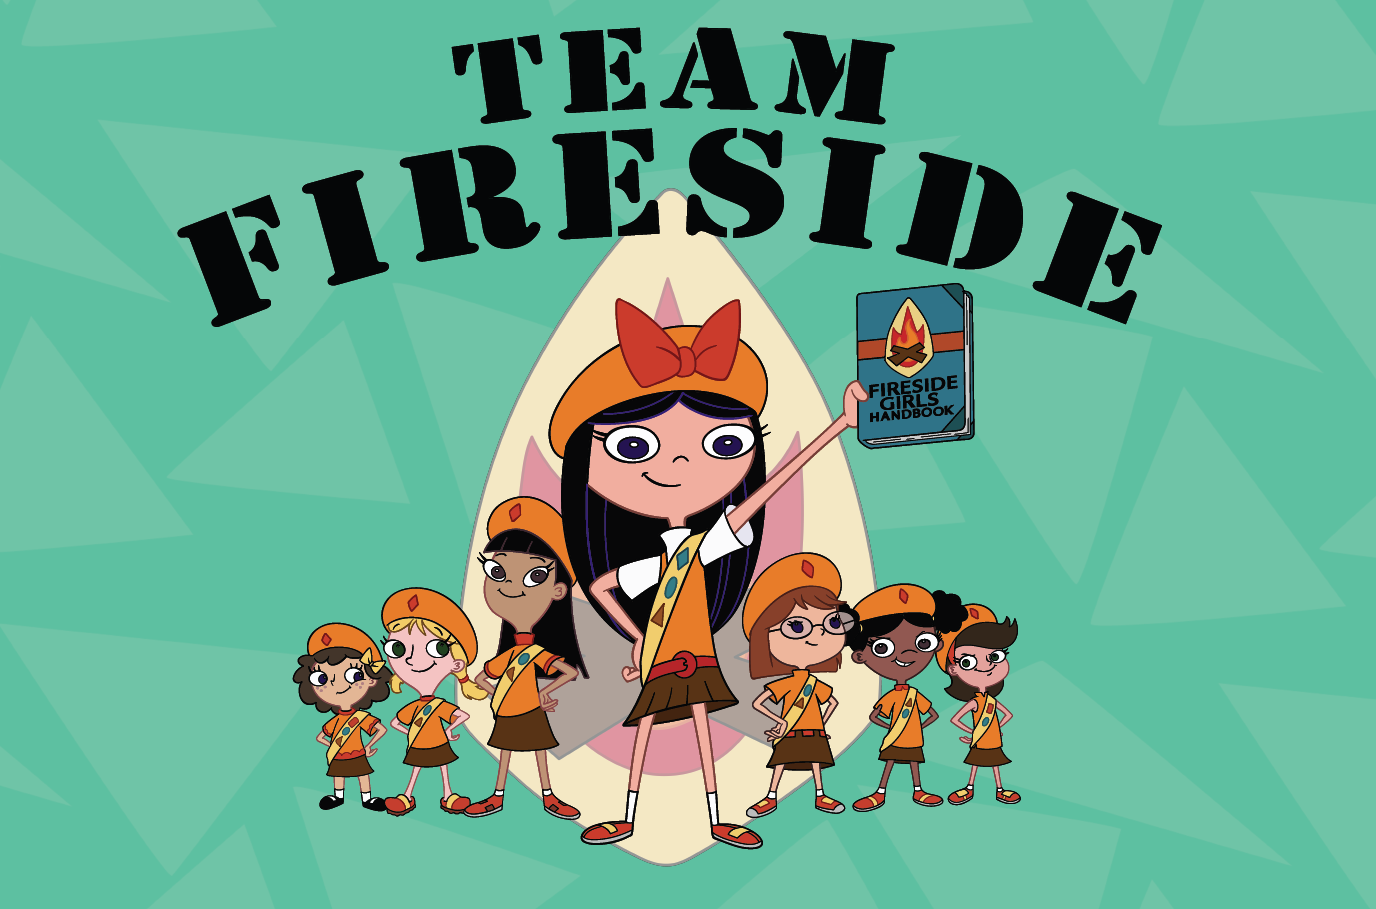 Phineas and Ferb present Isabella and the Fireside Girls.